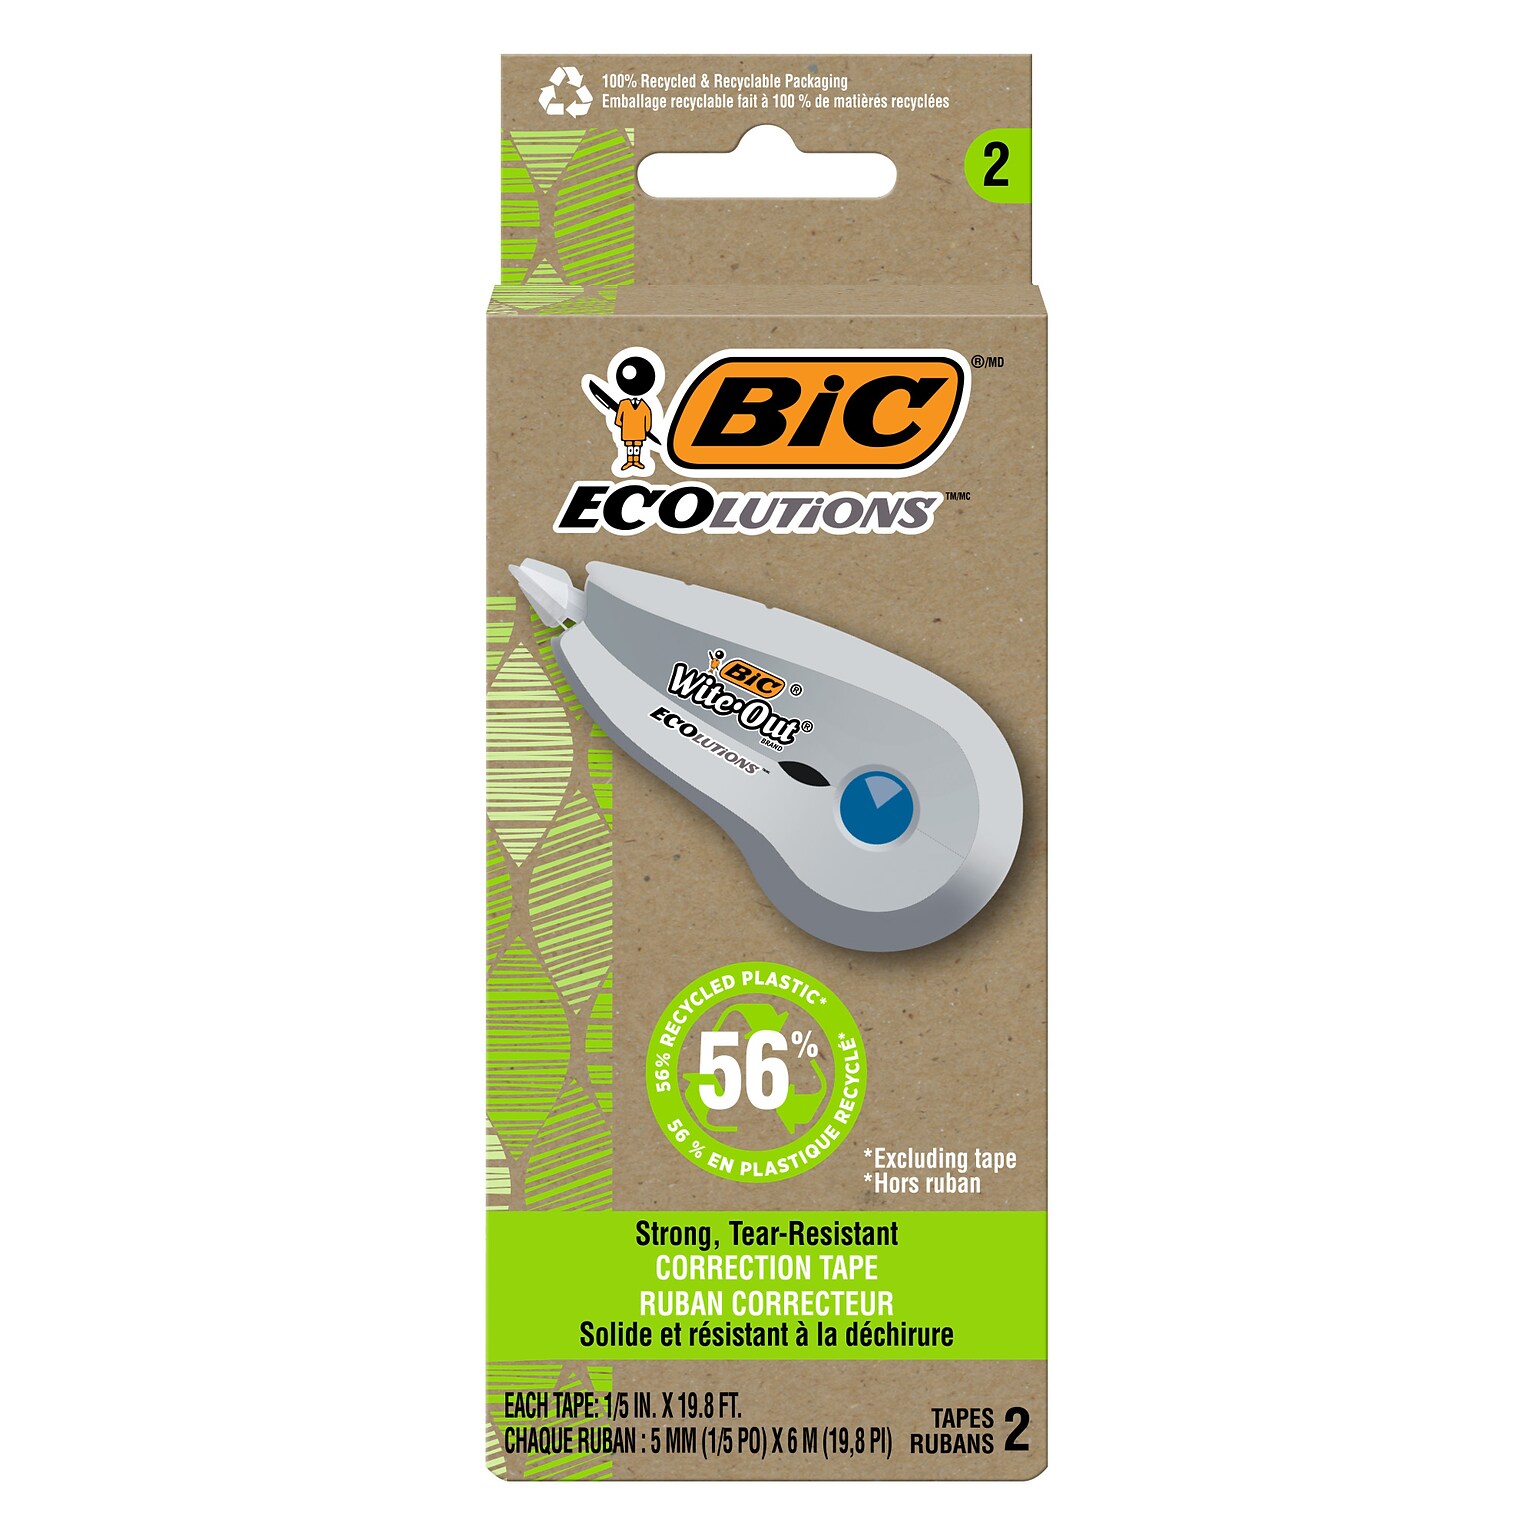 BIC Ecolutions Wite-Out Brand Correction Tape, White, 2/Pack (WOET21-WHI)